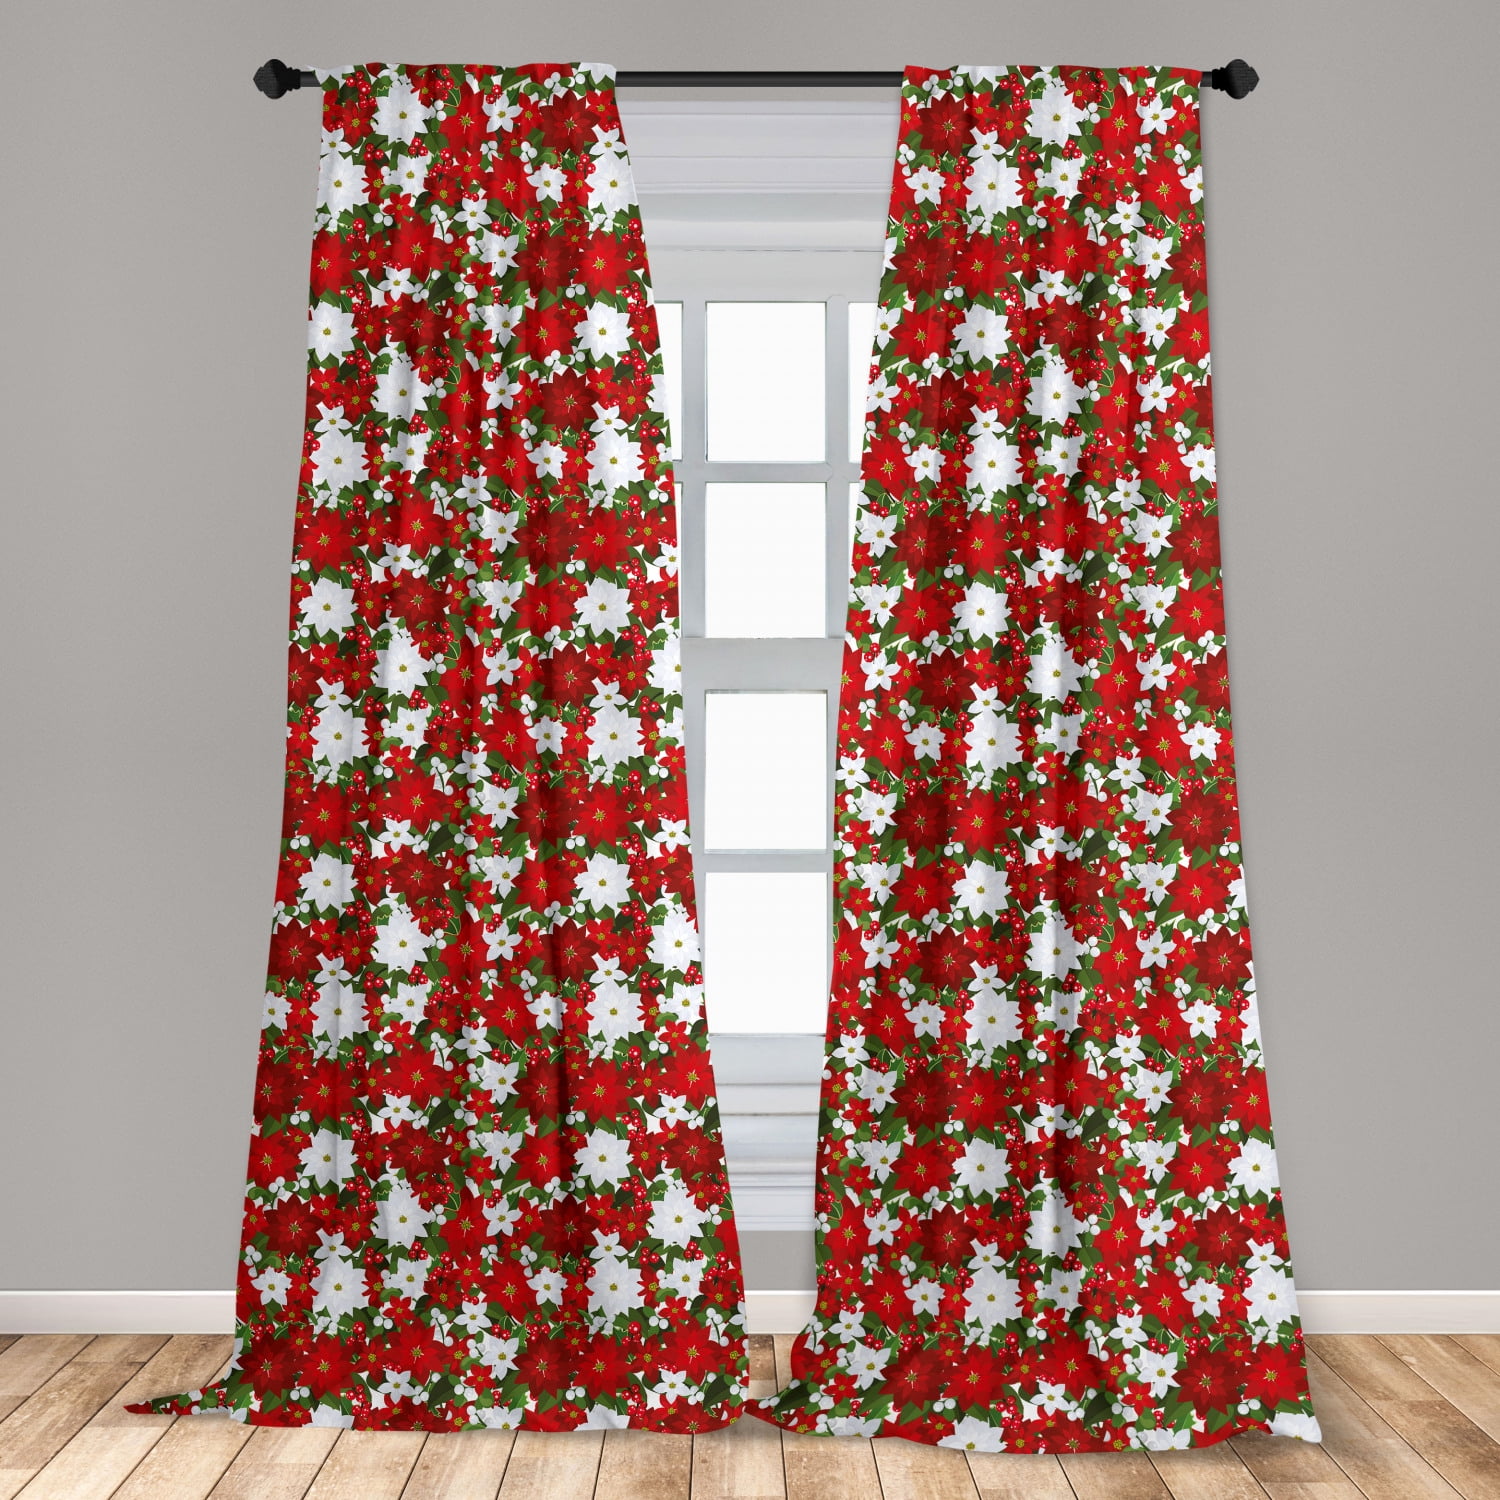 Christmas Tree Window Curtain Red Background Living Room Bedroom Window Drapes 